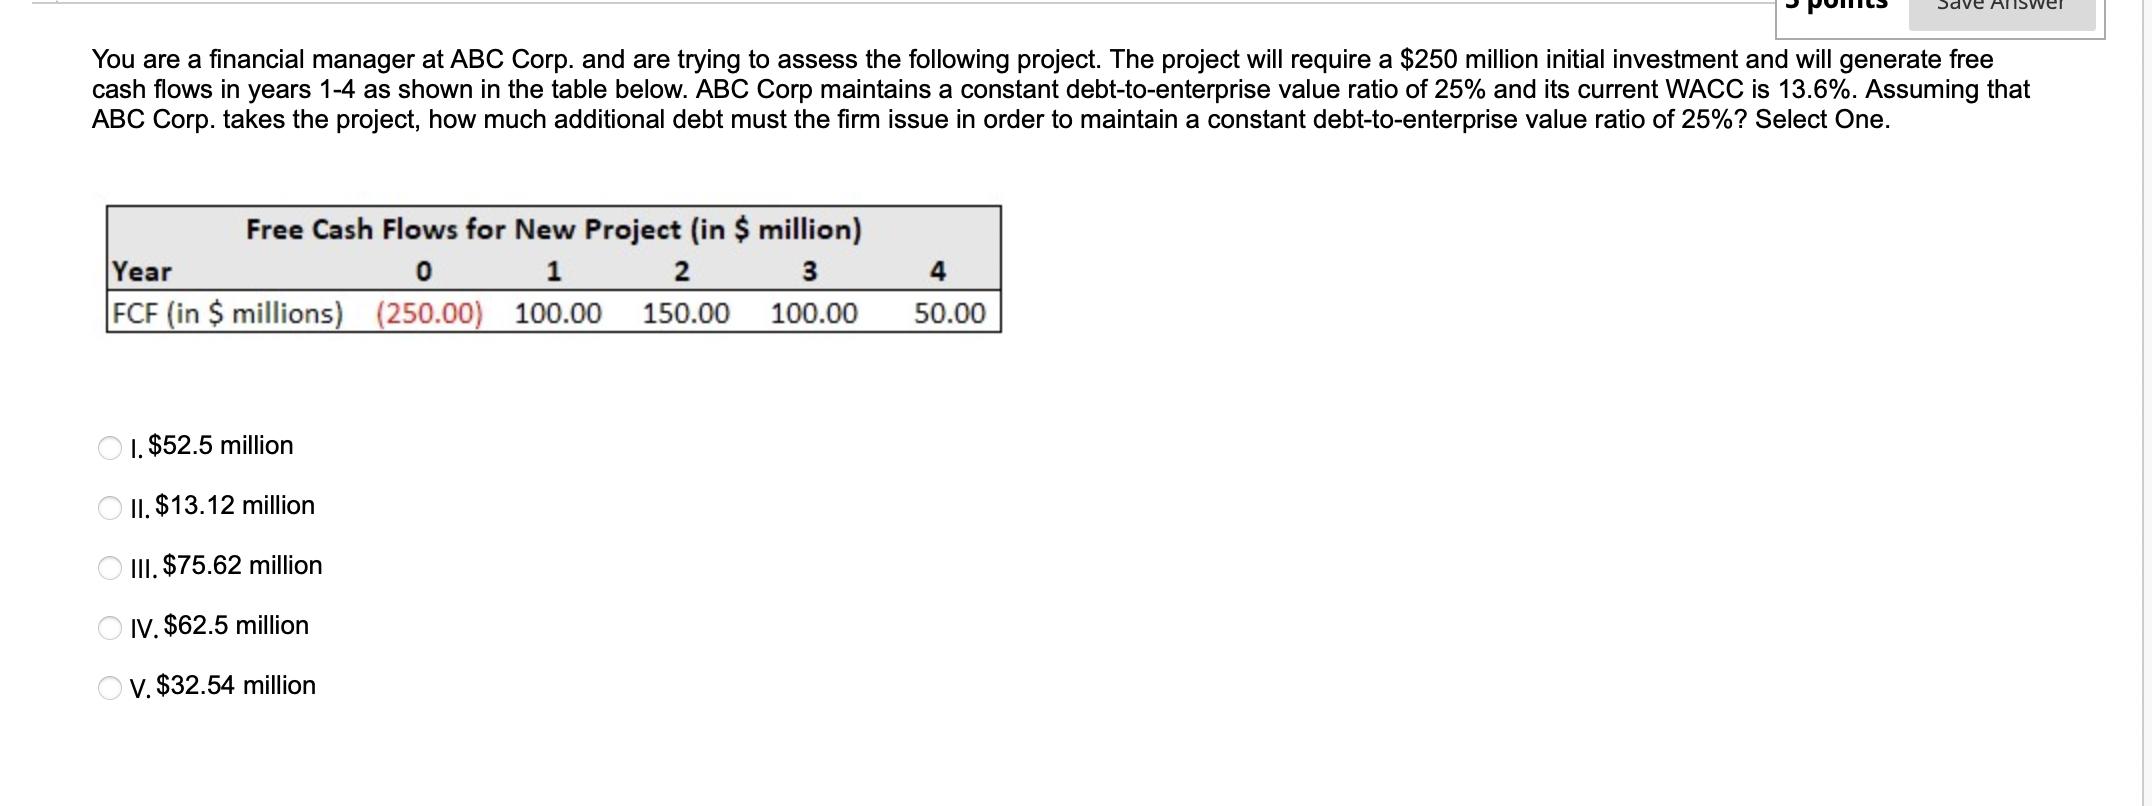 You are a financial manager at ABC Corp. and are trying to assess the following project. The project will